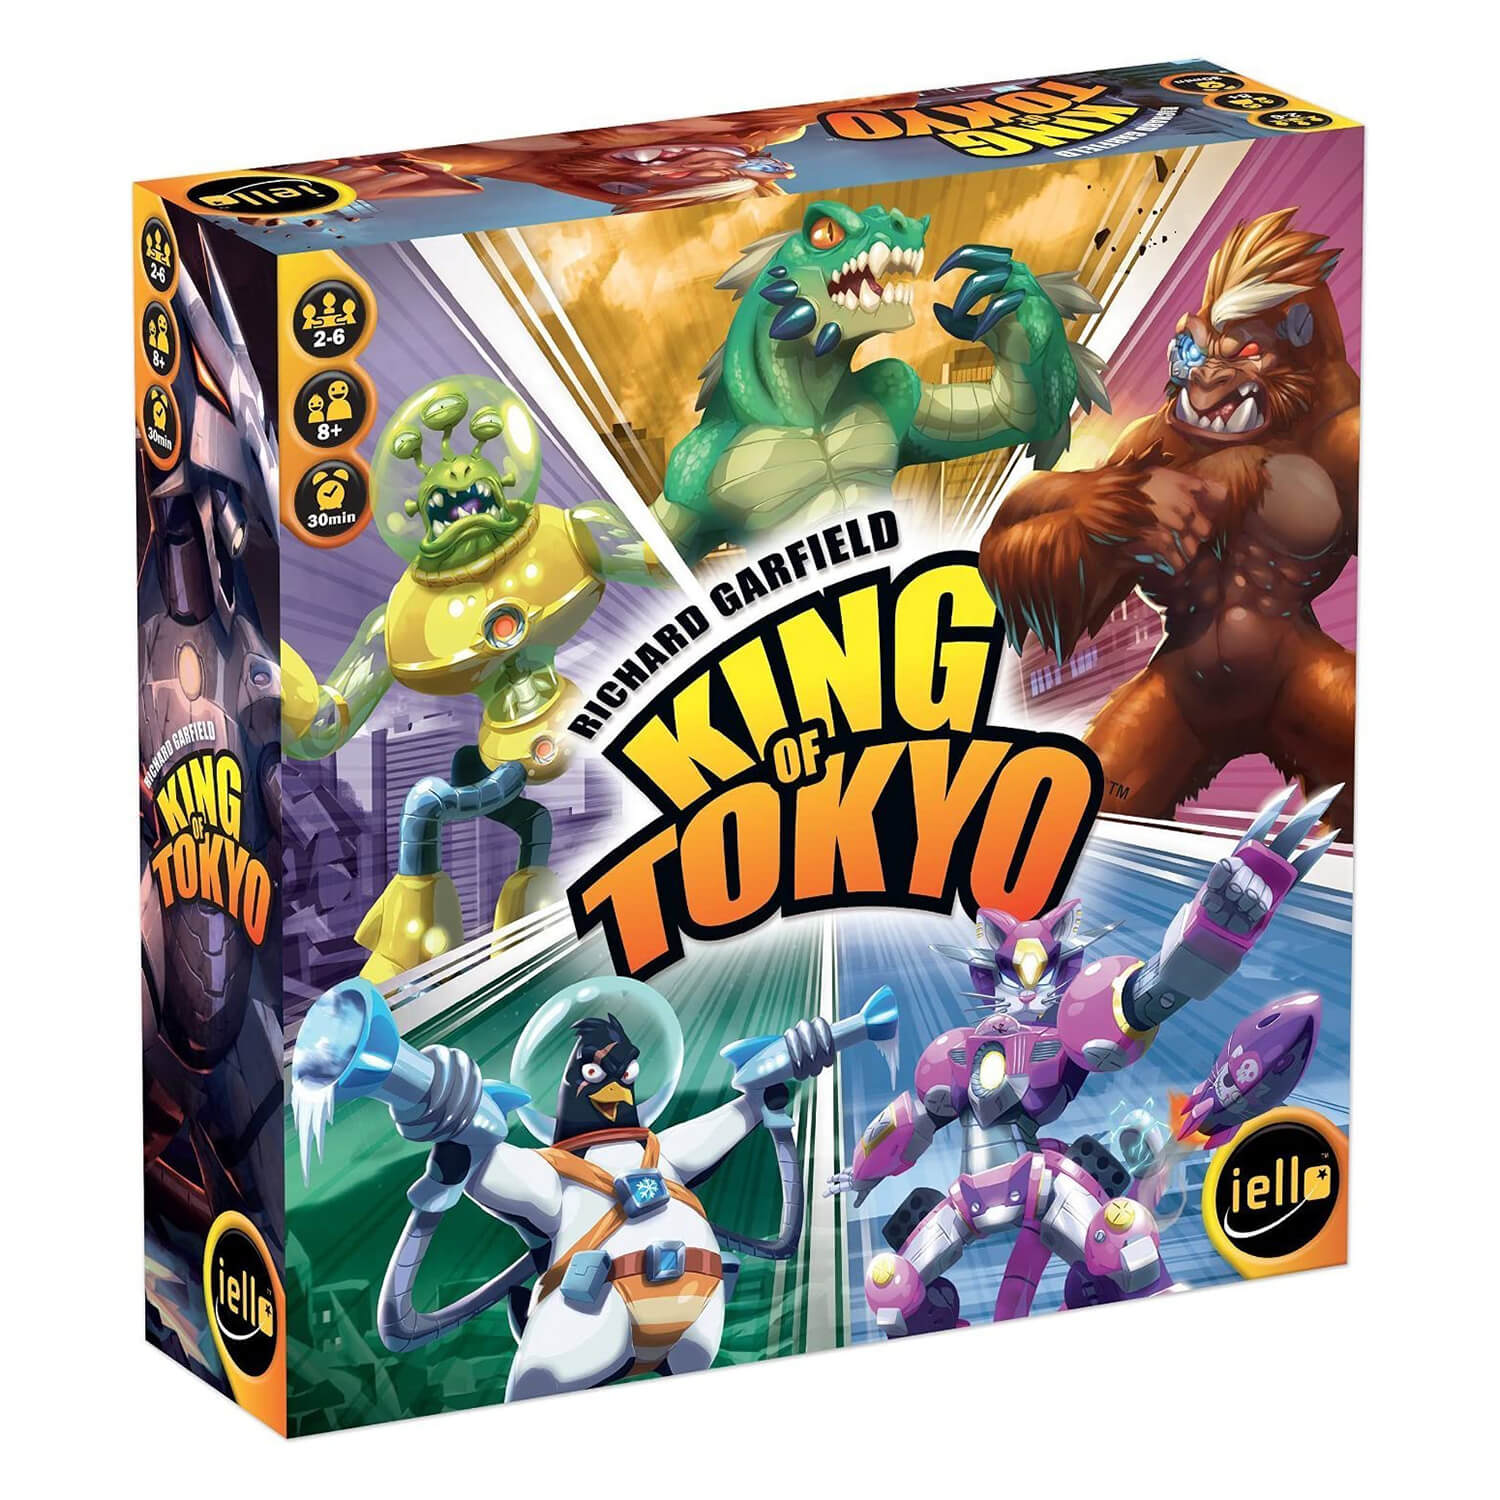 Front view of the King of Tokyo 2nd Edition Game package.